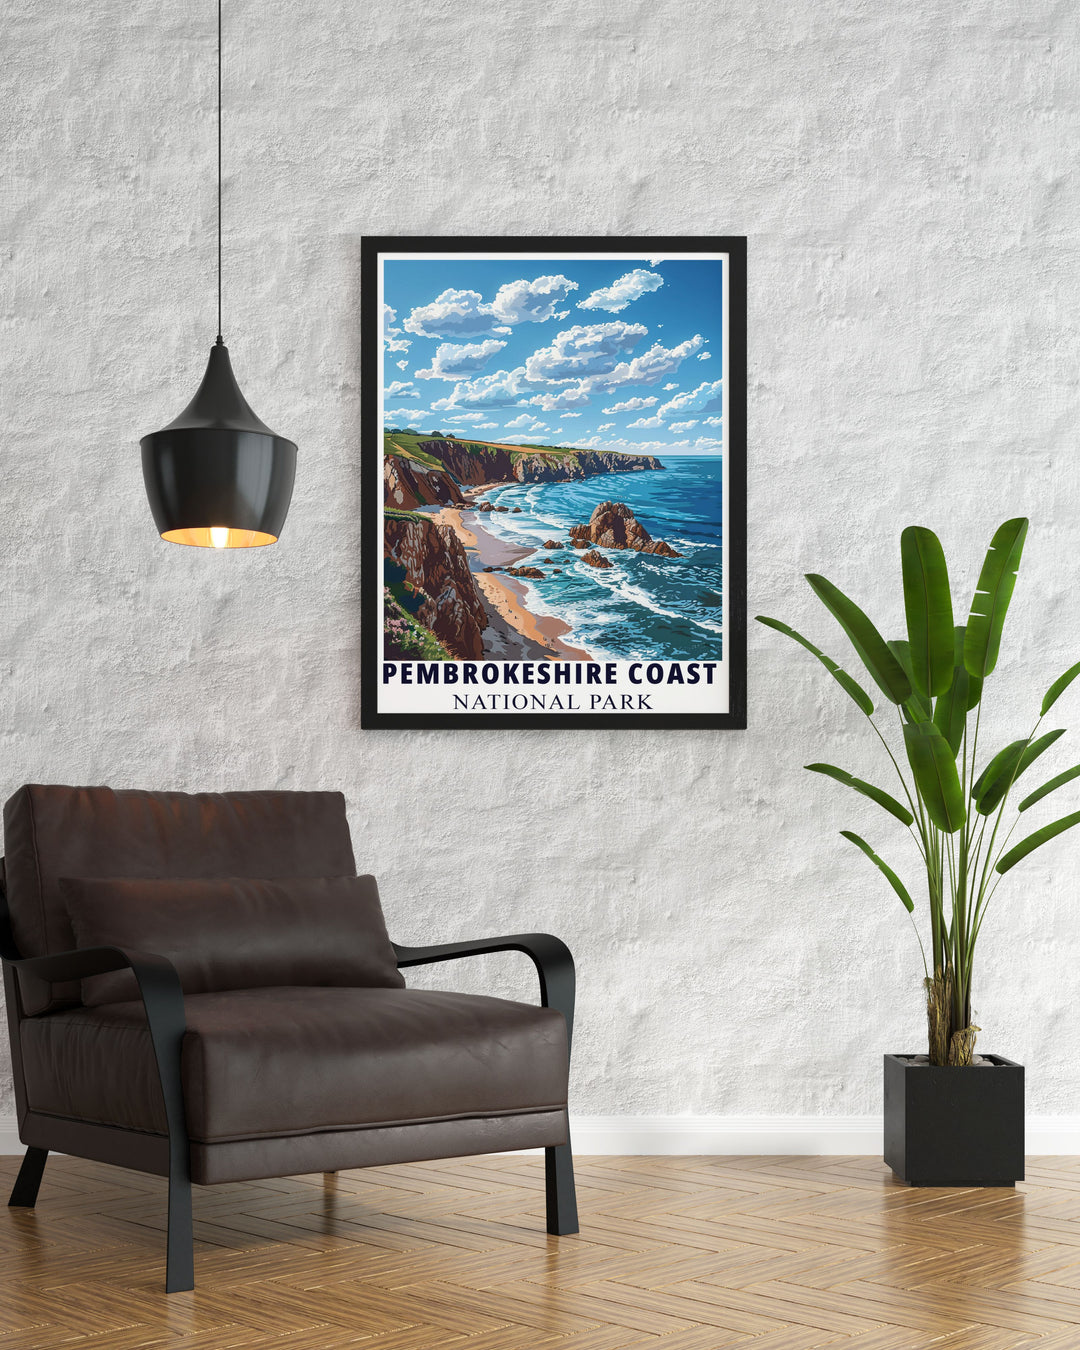 Coastline prints capturing the dramatic beauty of Pembrokeshire Wales with vintage travel art style showcasing the natural wonders of UK national parks ideal for enhancing your home decor or as a thoughtful gift for travel enthusiasts.